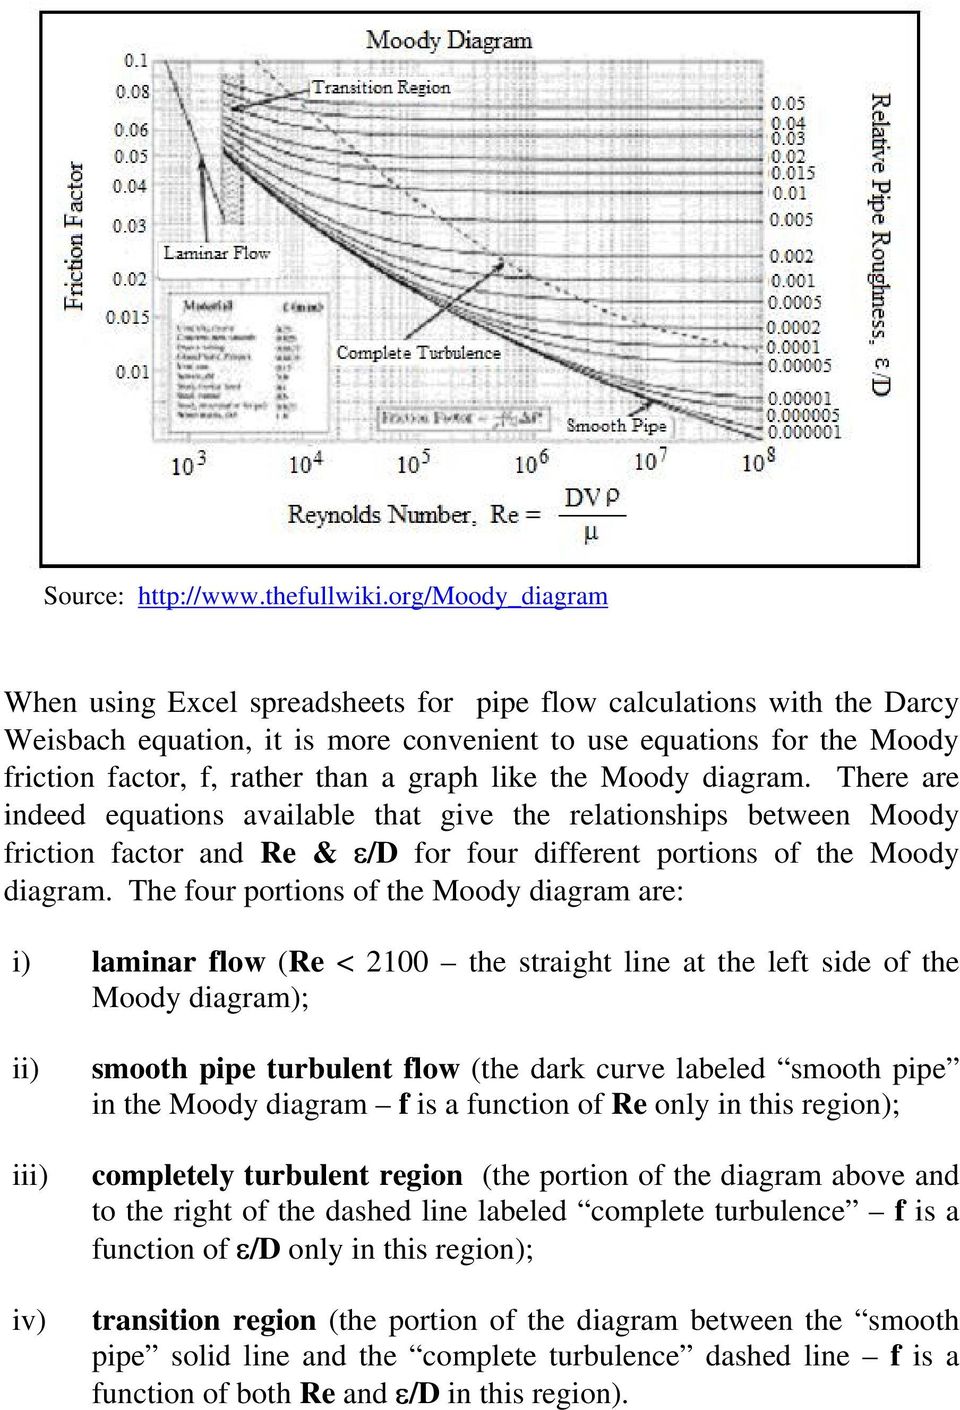 graph like the Moody diagram. There are indeed equations available that give the relationships between Moody friction factor and Re & ε/d for four different portions of the Moody diagram.